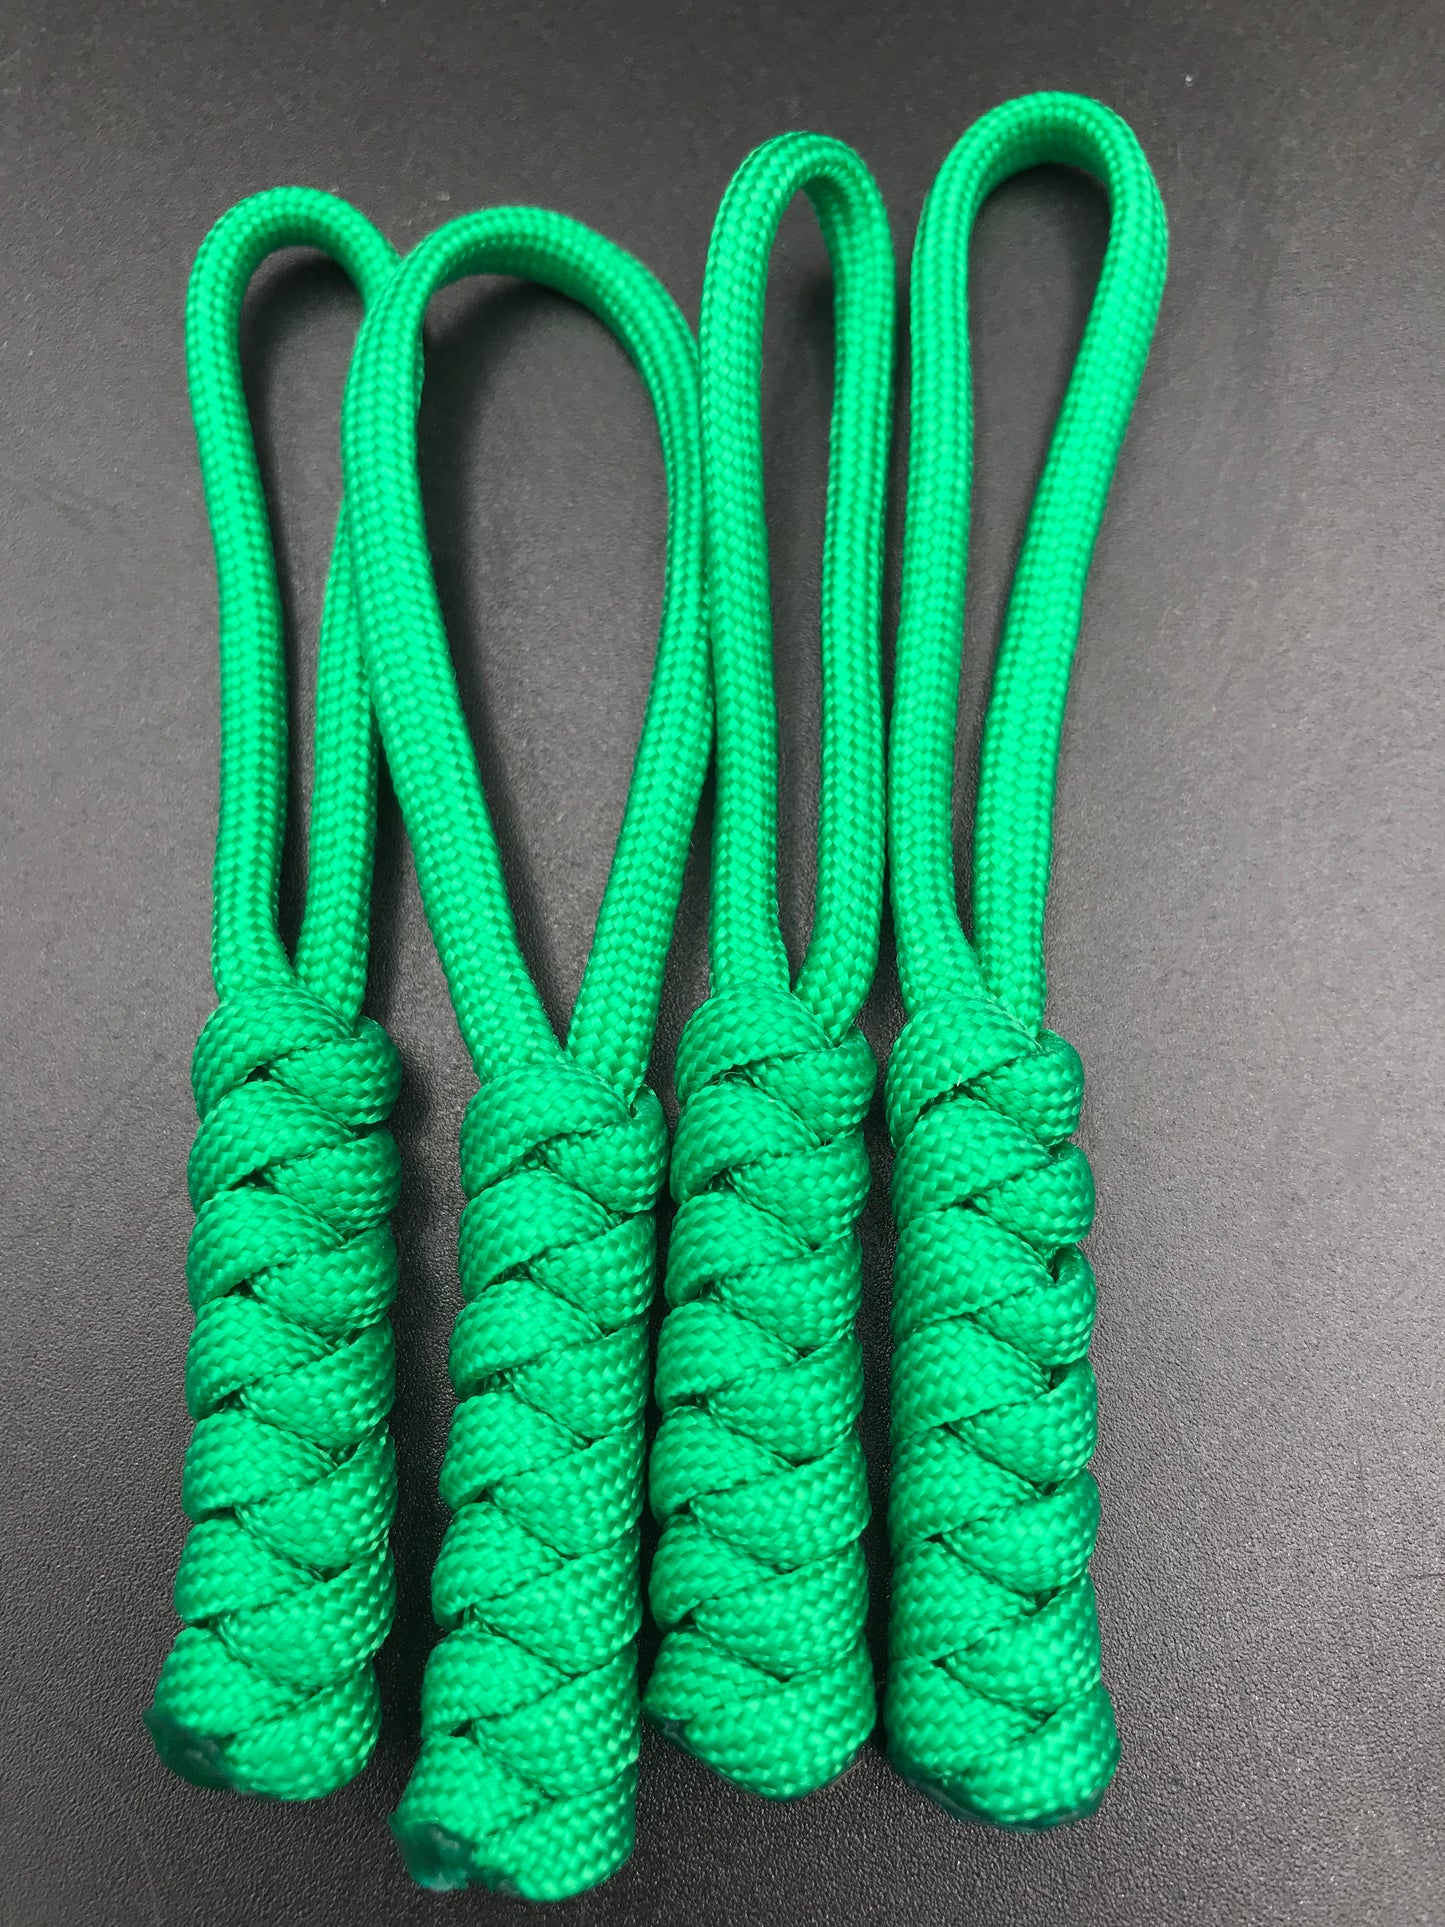 Paracord zip pulls in grass green (4 pack) light weight, strong and hand crafted in U.K